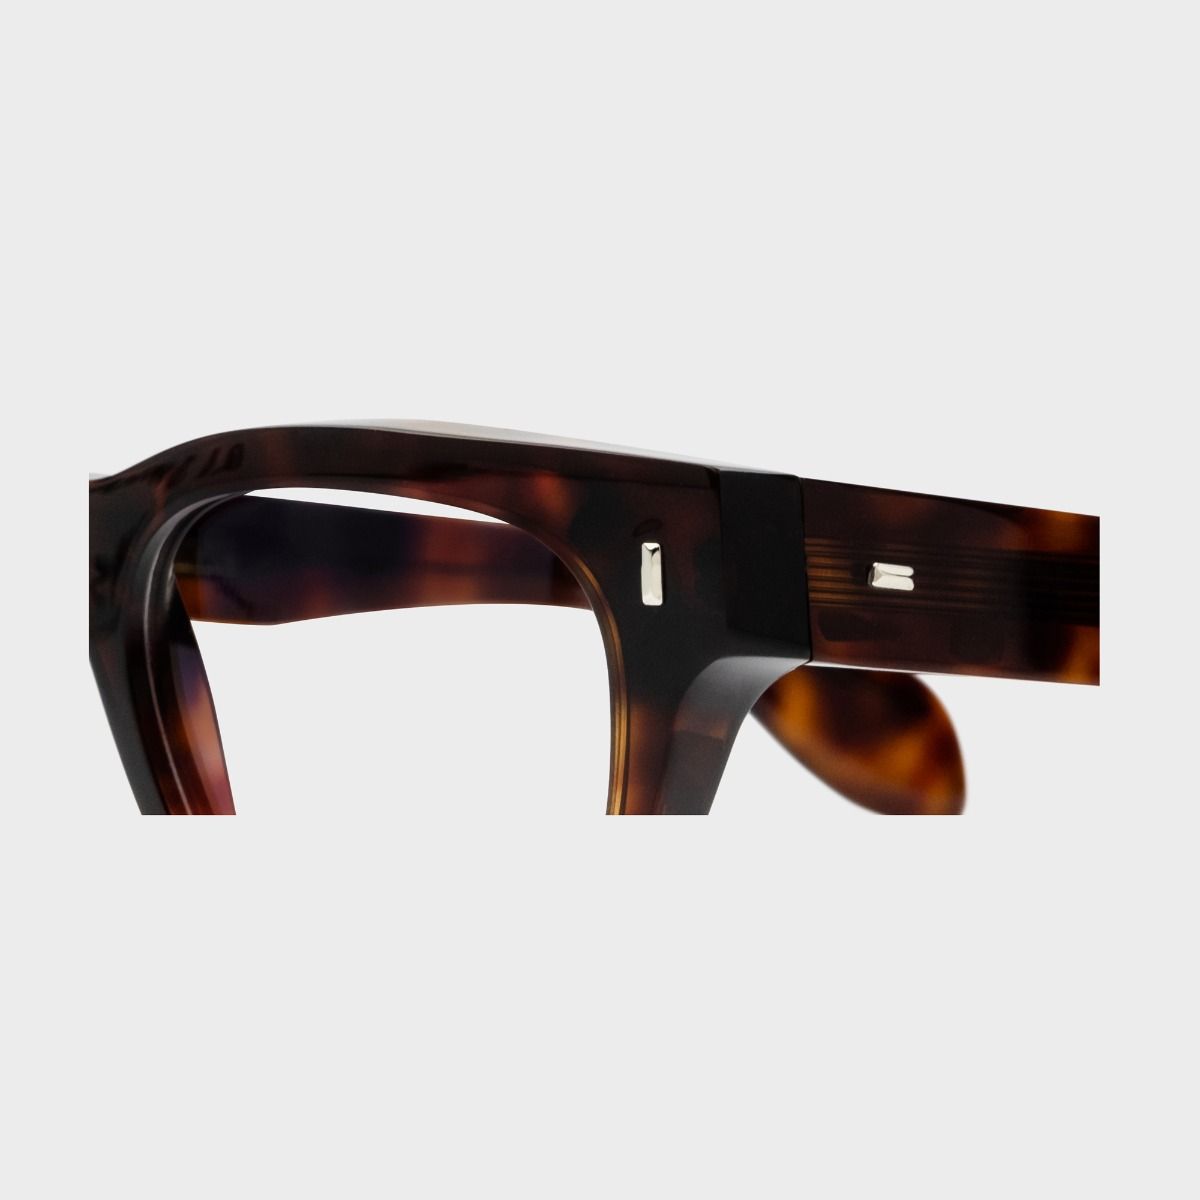 Cutler and Gross, 9772 Optical Square Glasses - Dark Turtle